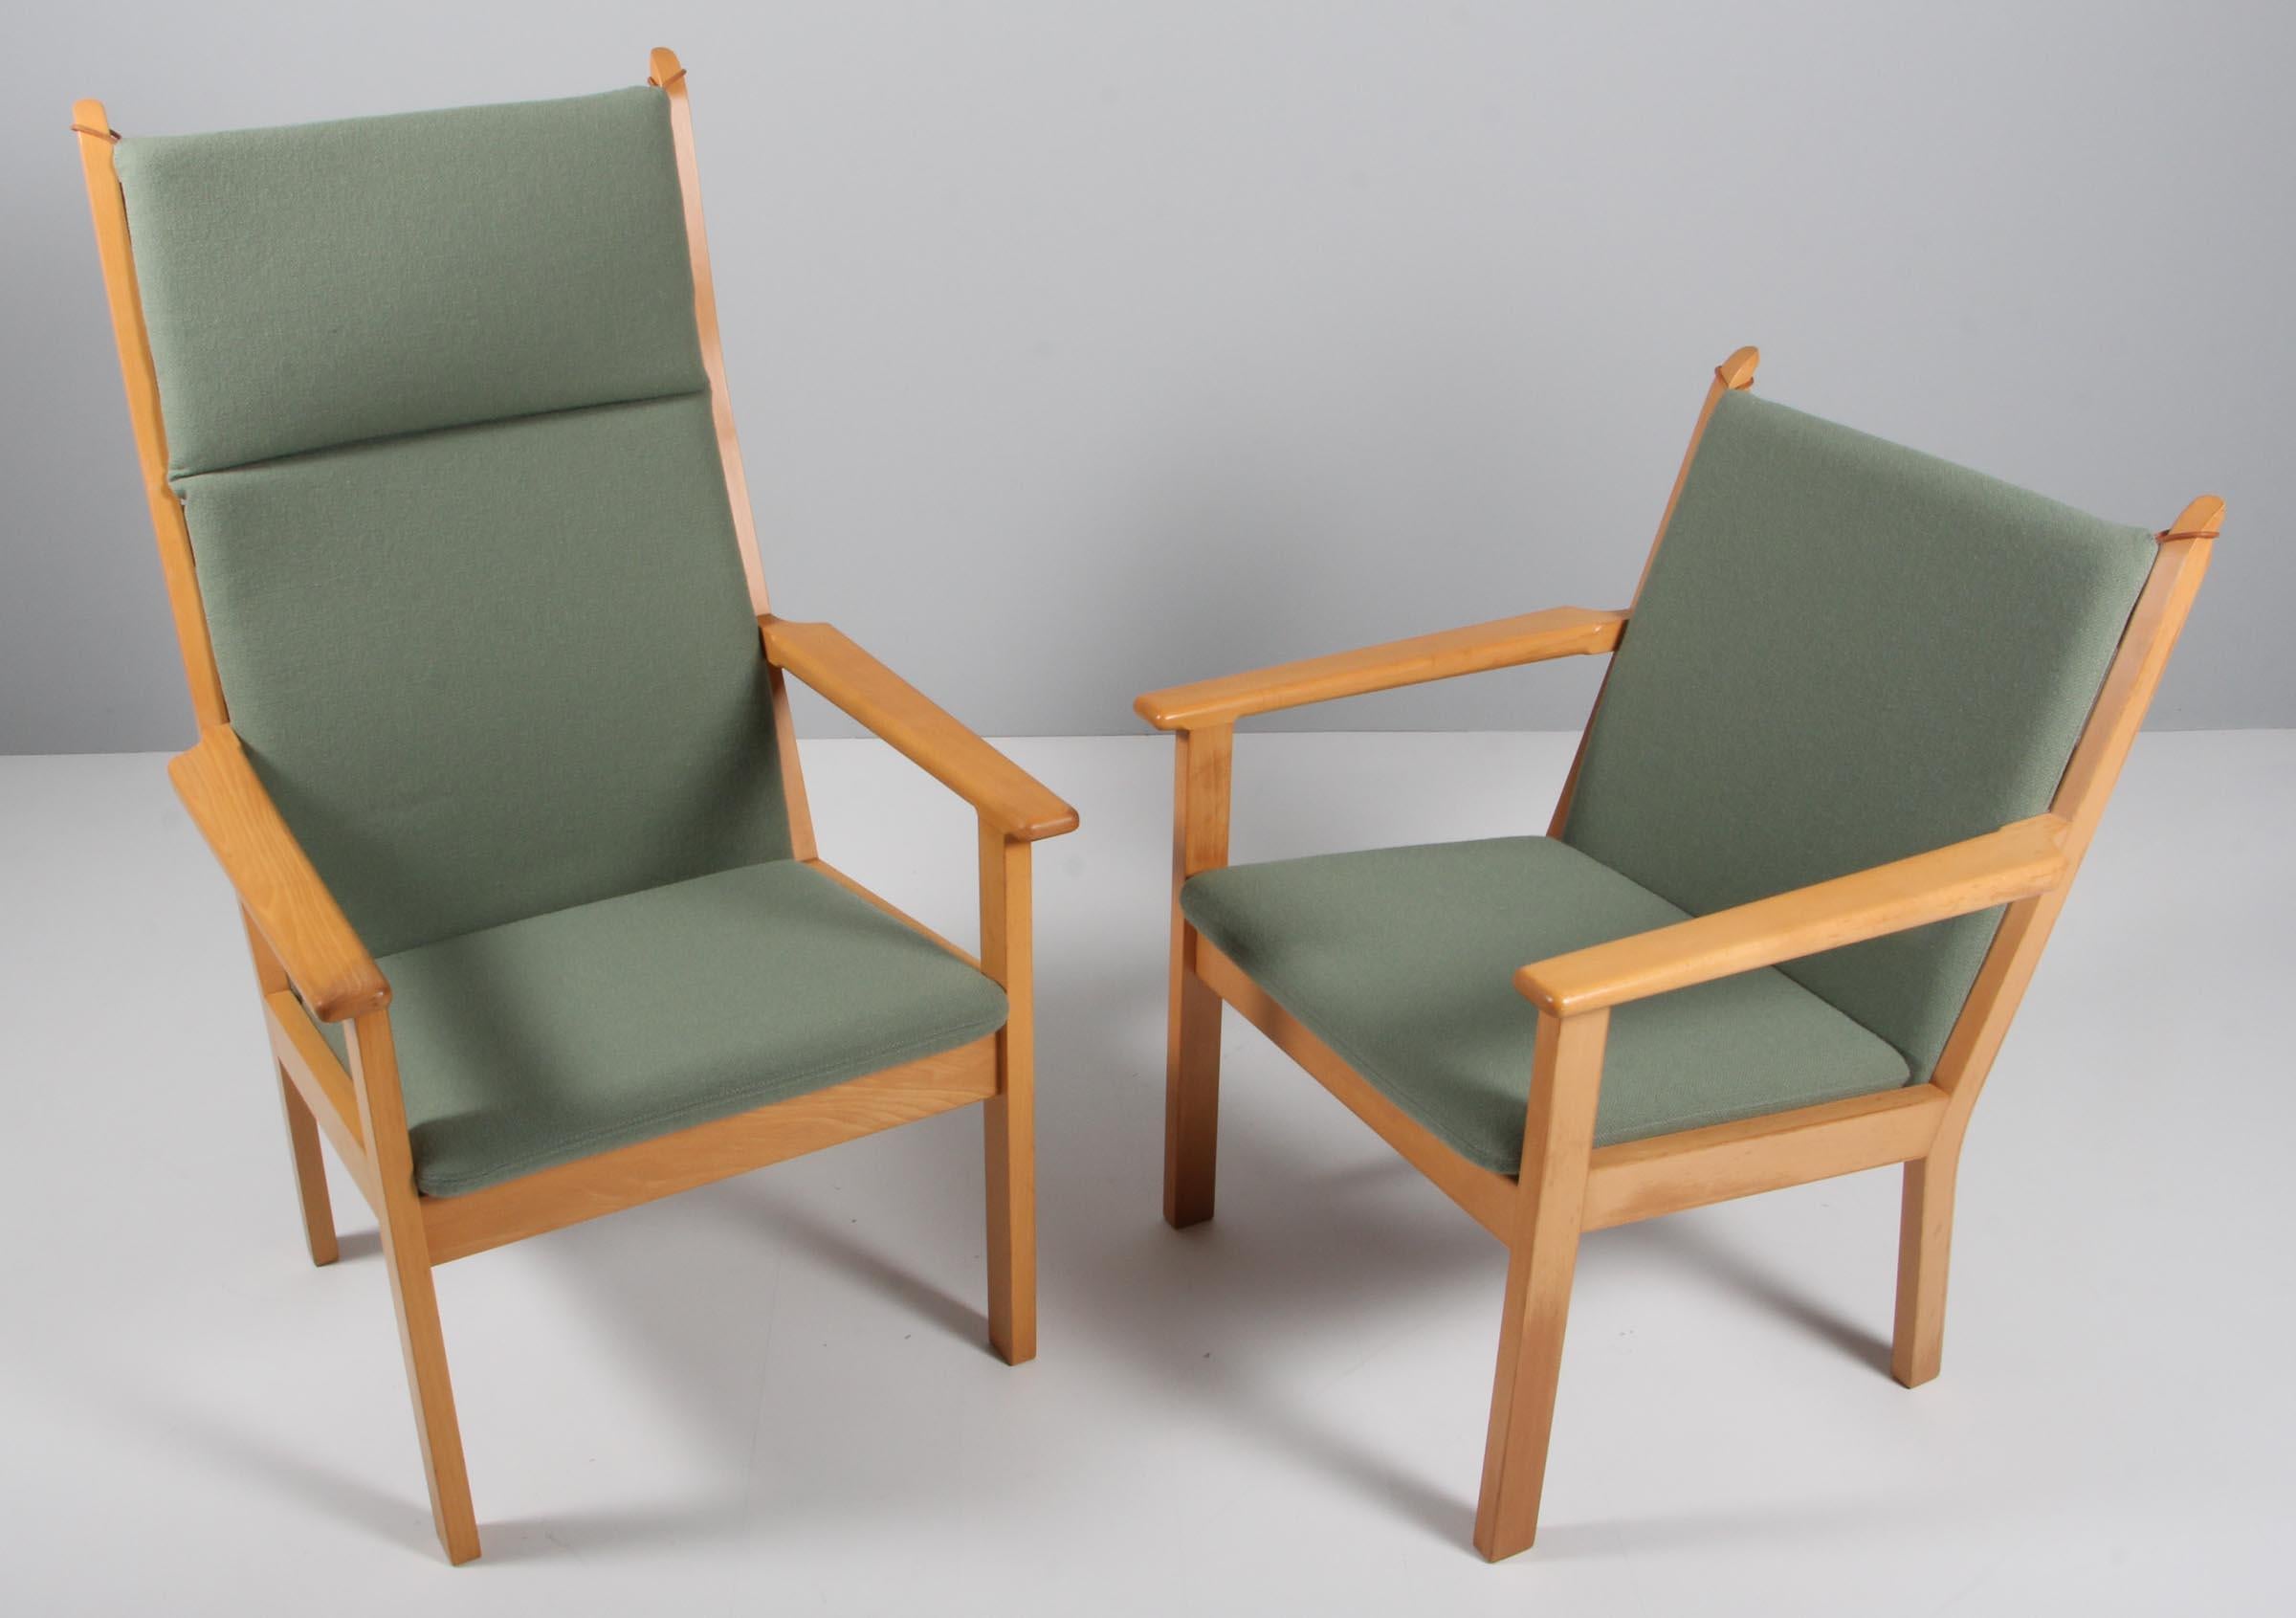 Hans J. Wegner pair of armchairs, one highback and one lowback. Original upholstered with light green Hallingdal wool from Kvadrat.

Frame of solid beech. 

Made by Getama, model GE284.

Height 115/87/44.